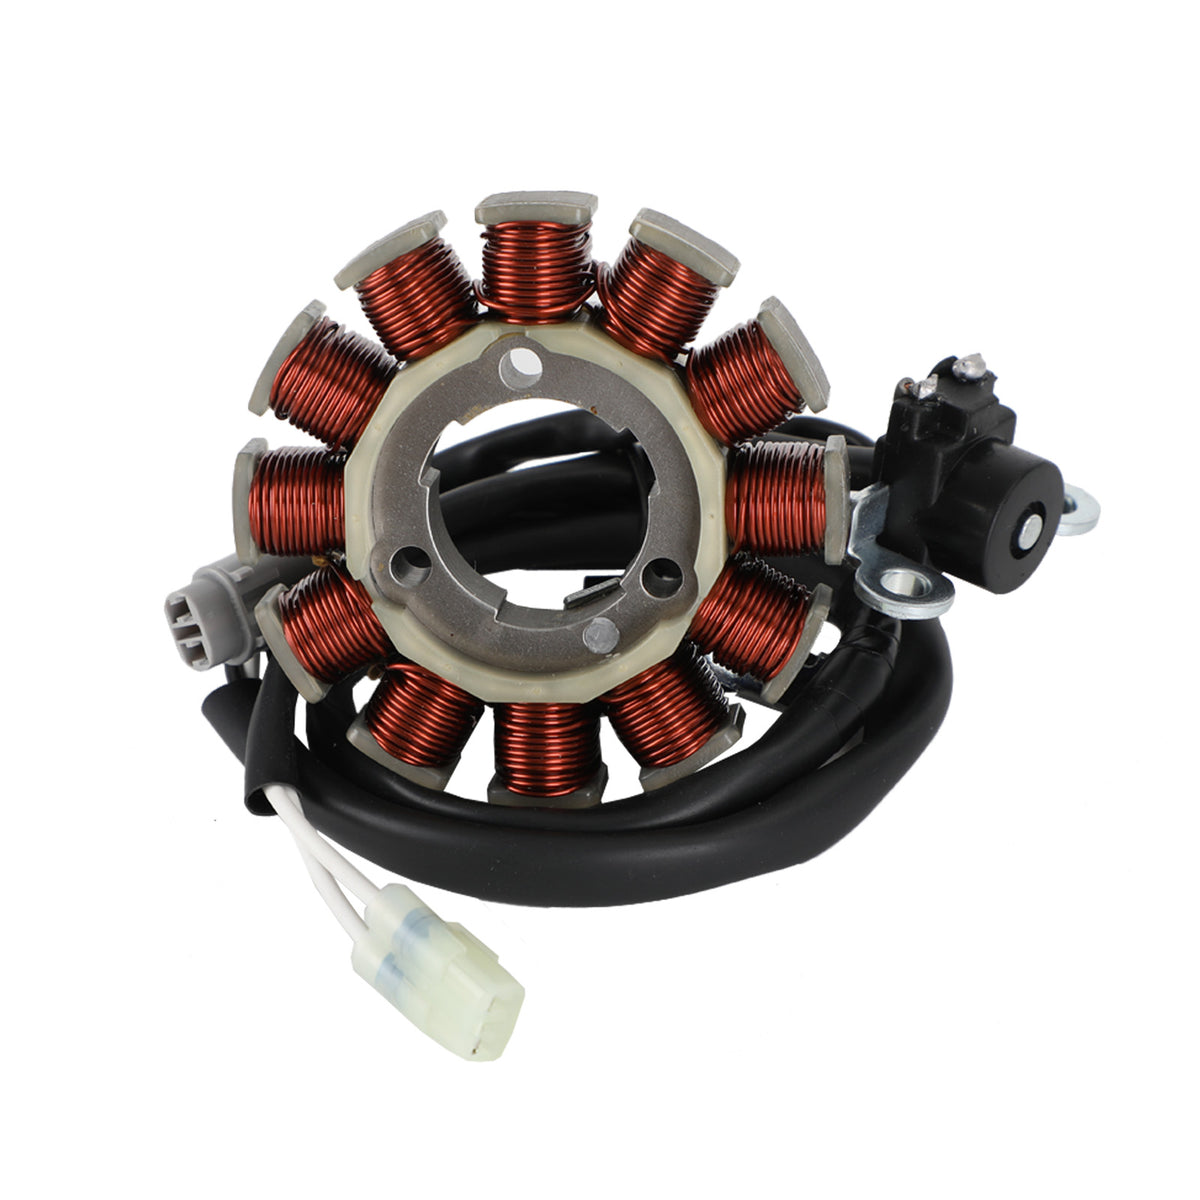 Magneto Stator+Voltage Rectifier+Gasket For Yamaha YZ 250F YZ250F 2014-2018 Generic Fedex Express Shipping